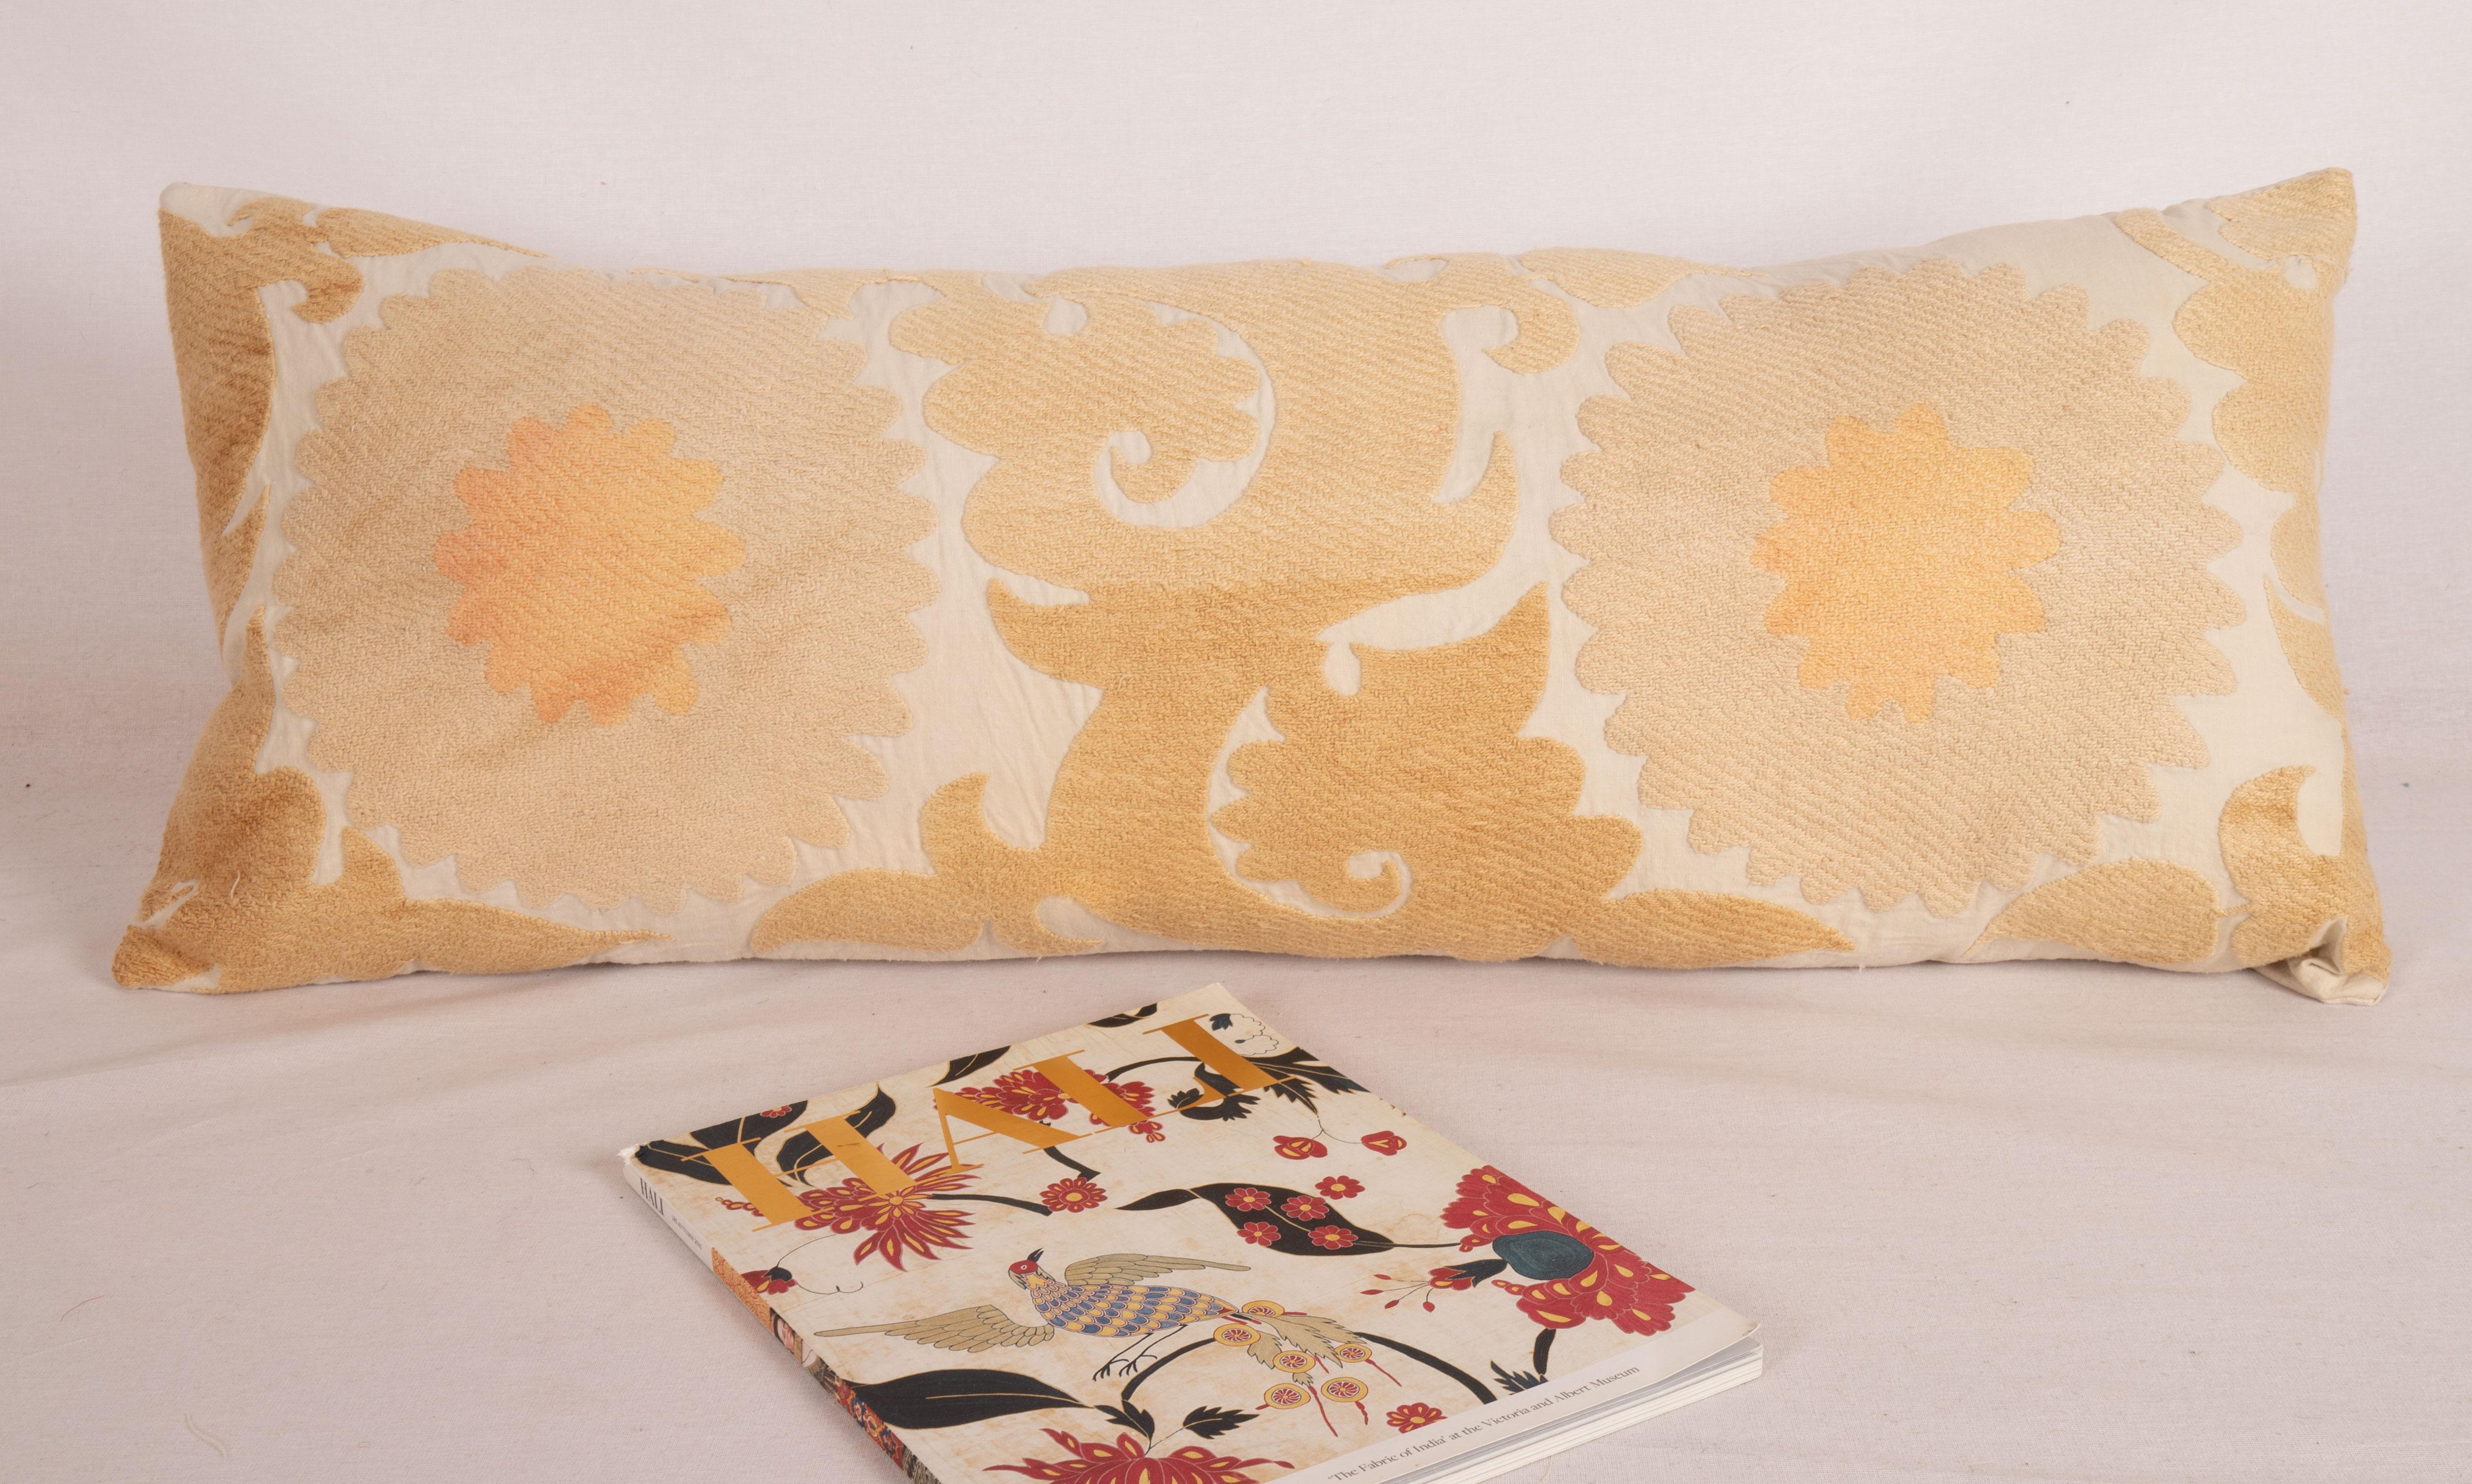 Cotton Suzani Pillow Case, Made from a Mid-20th C, Uzbek Suzani For Sale